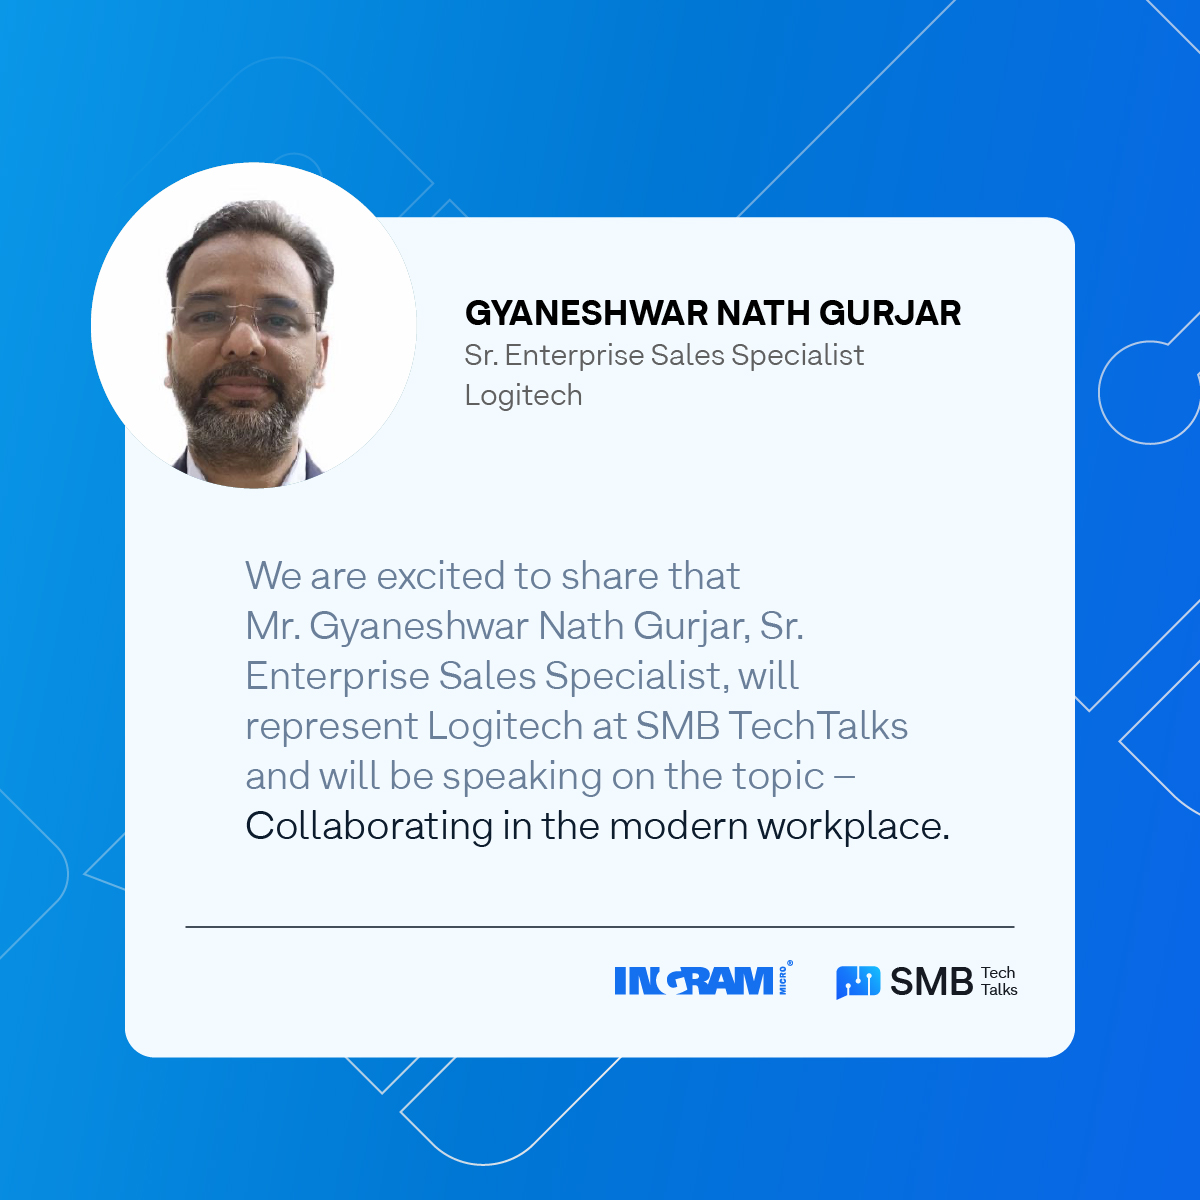 SMB TechTalks: Get Ready for Valuable Insights by Eminent Technology Leaders! @Acer @Adobe @Logitech @MicrosoftIndia @cisco_in @HPE_India #ingrammicroindia #SMBTechTalks